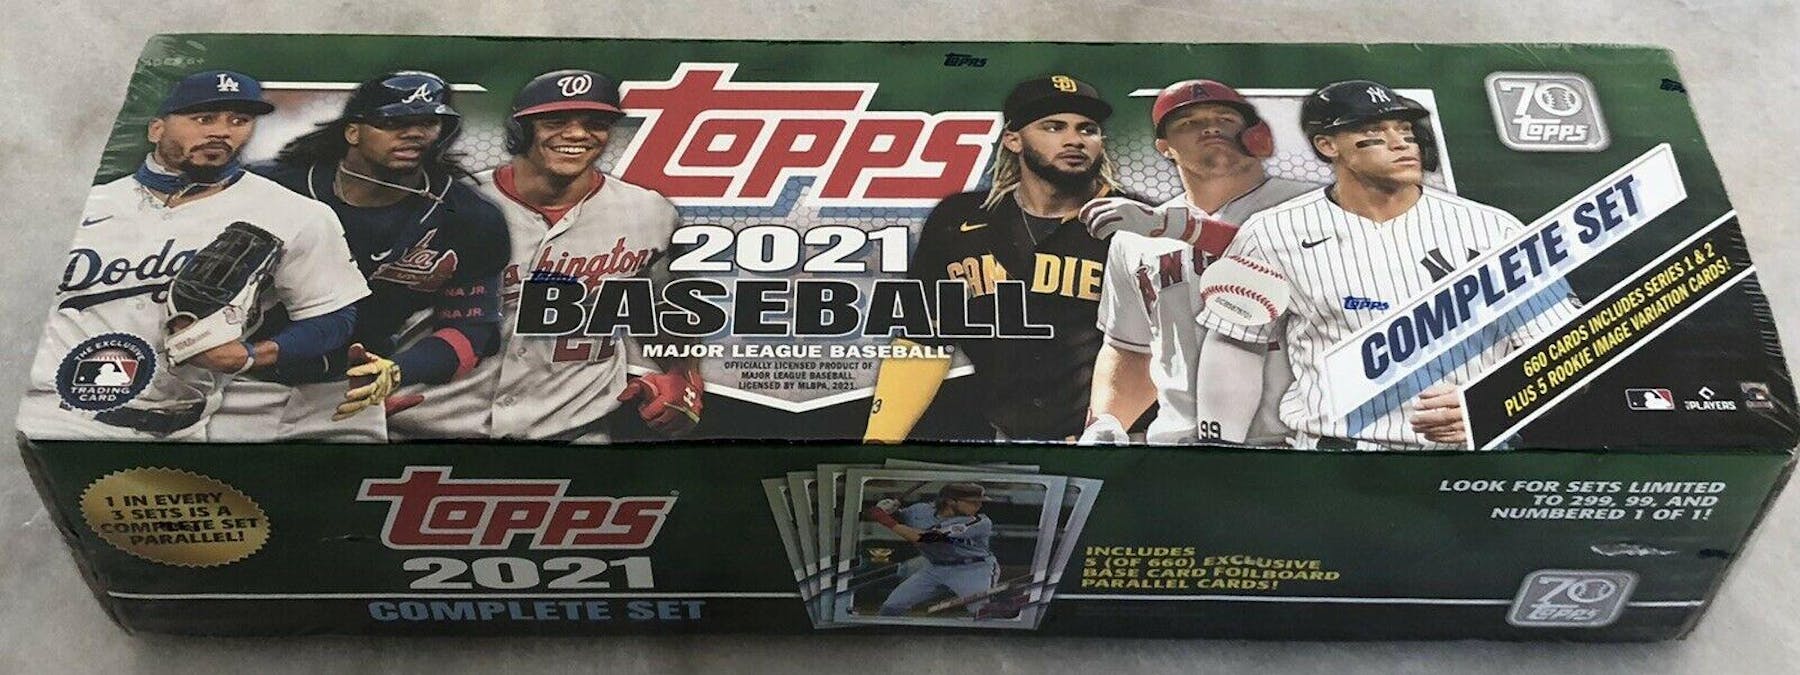 2022 TOPPS BASEBALL COMPLETE SET GREEN 660 Cards + 5 Rookie Variations -  SEALED